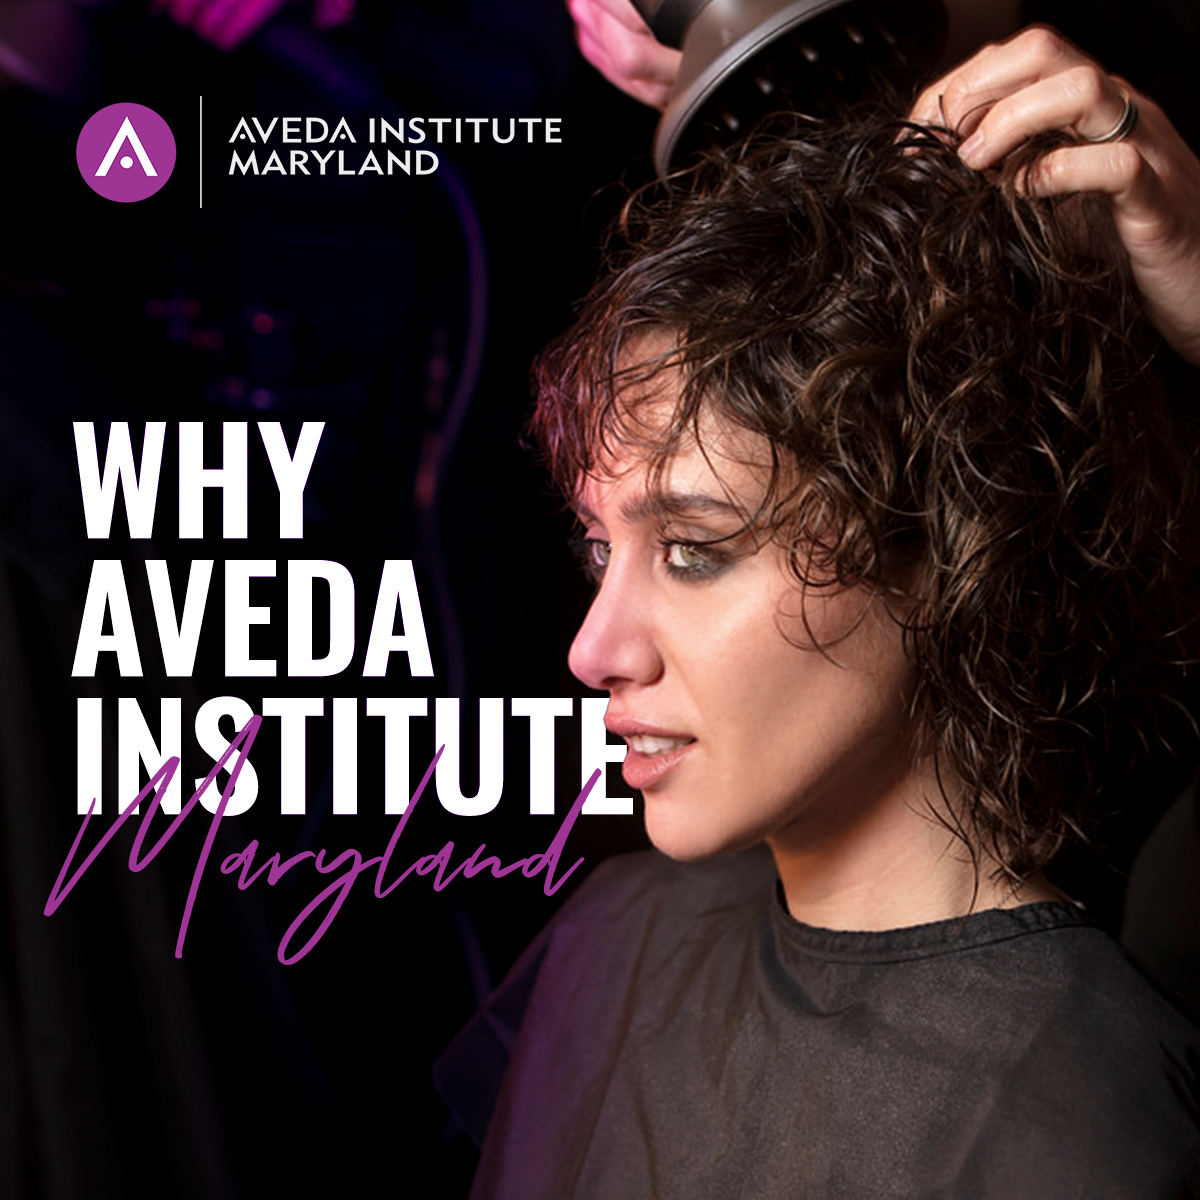 WHY AVEDA INSTITUTE MARYLAND BEAUTY SCHOOL?